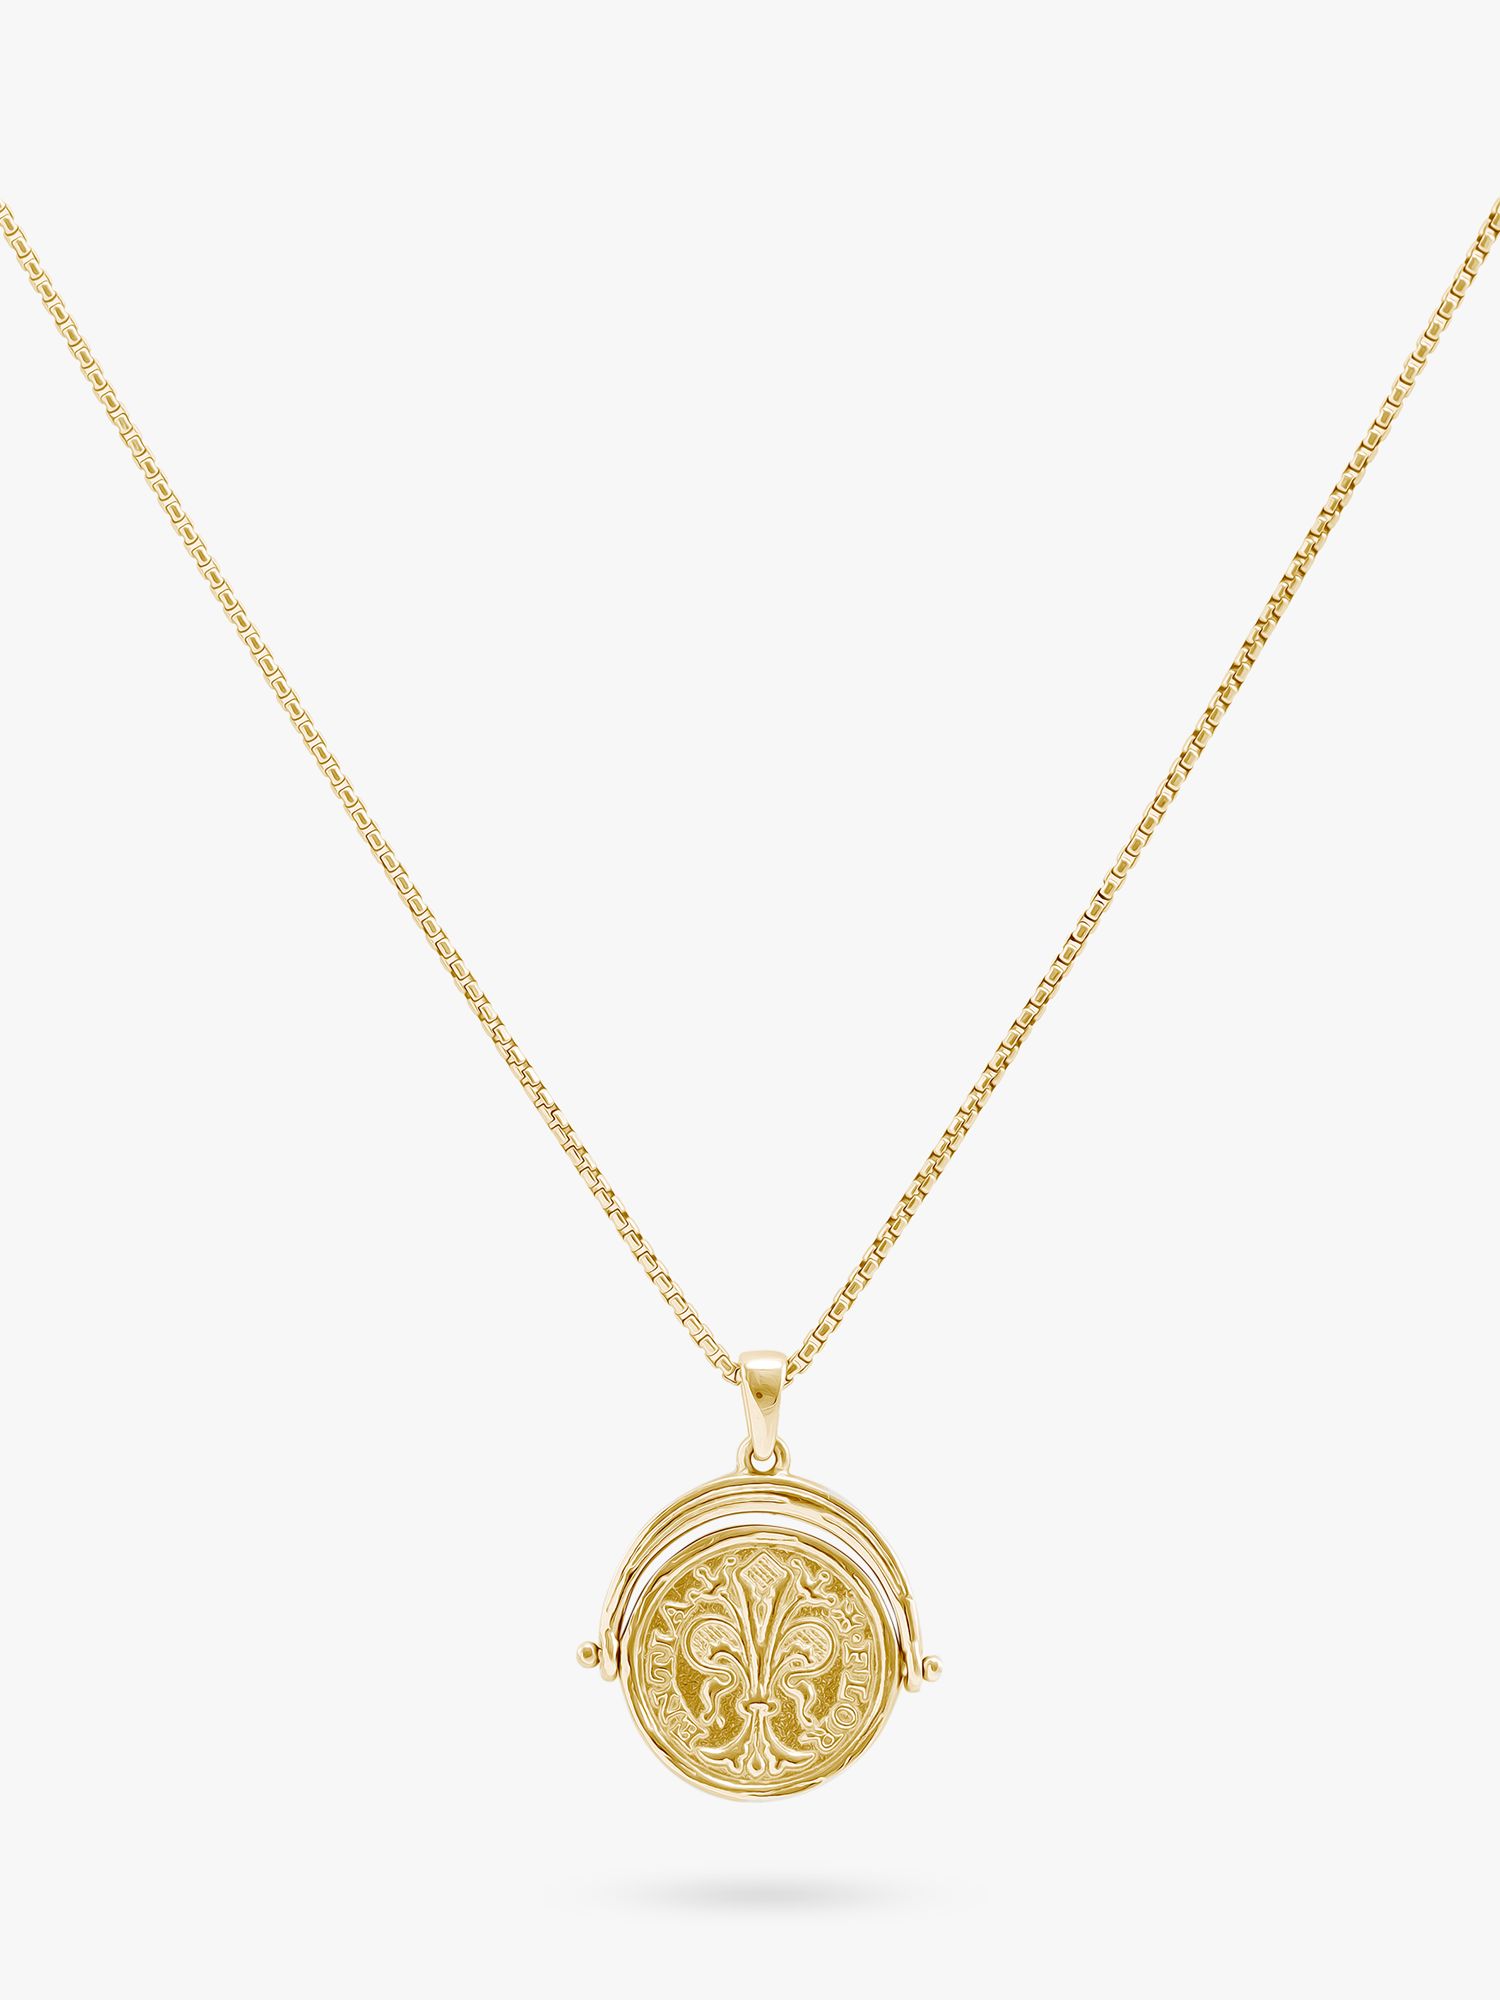 LARNAUTI Spinning Coin Pendant Necklace, Gold at John Lewis & Partners